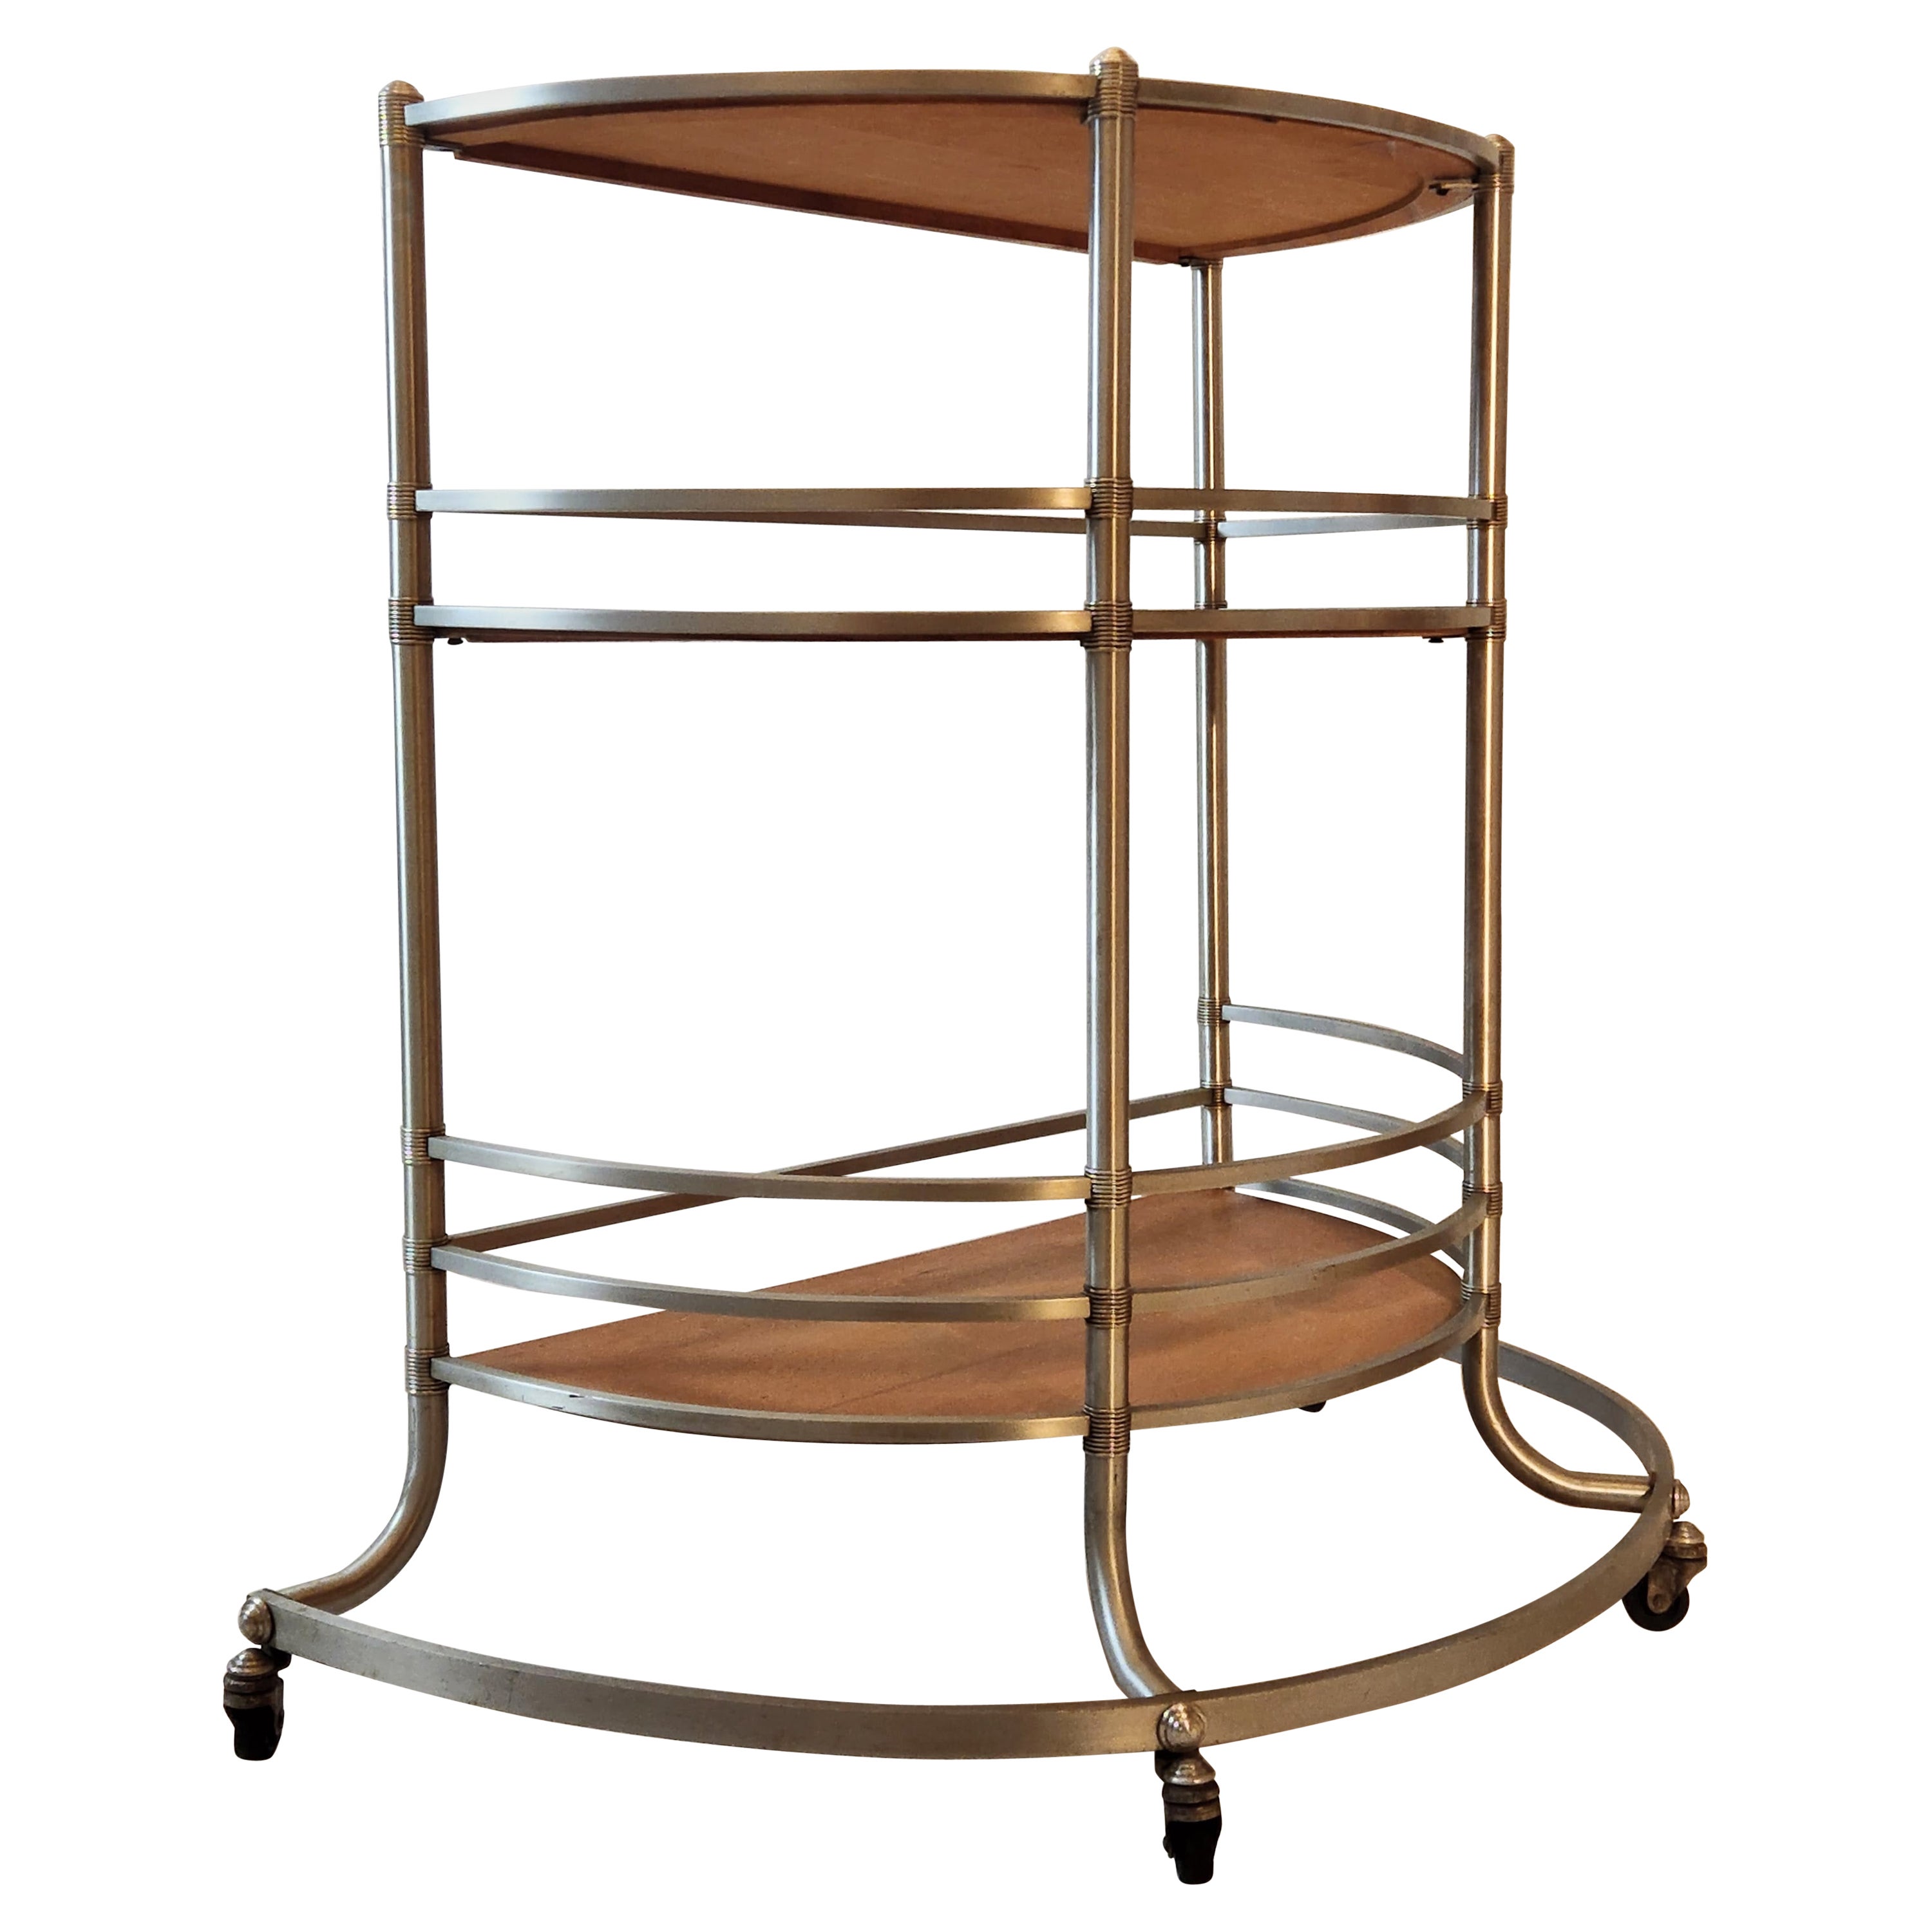 A Warren McArthur modernist rolling bar cart manufactured during the first years Warren was located in Rome, New York. 
The Warren McArthur Corporation moved from Los Angeles to Rome, New York in January of 1933.

The label ending in 